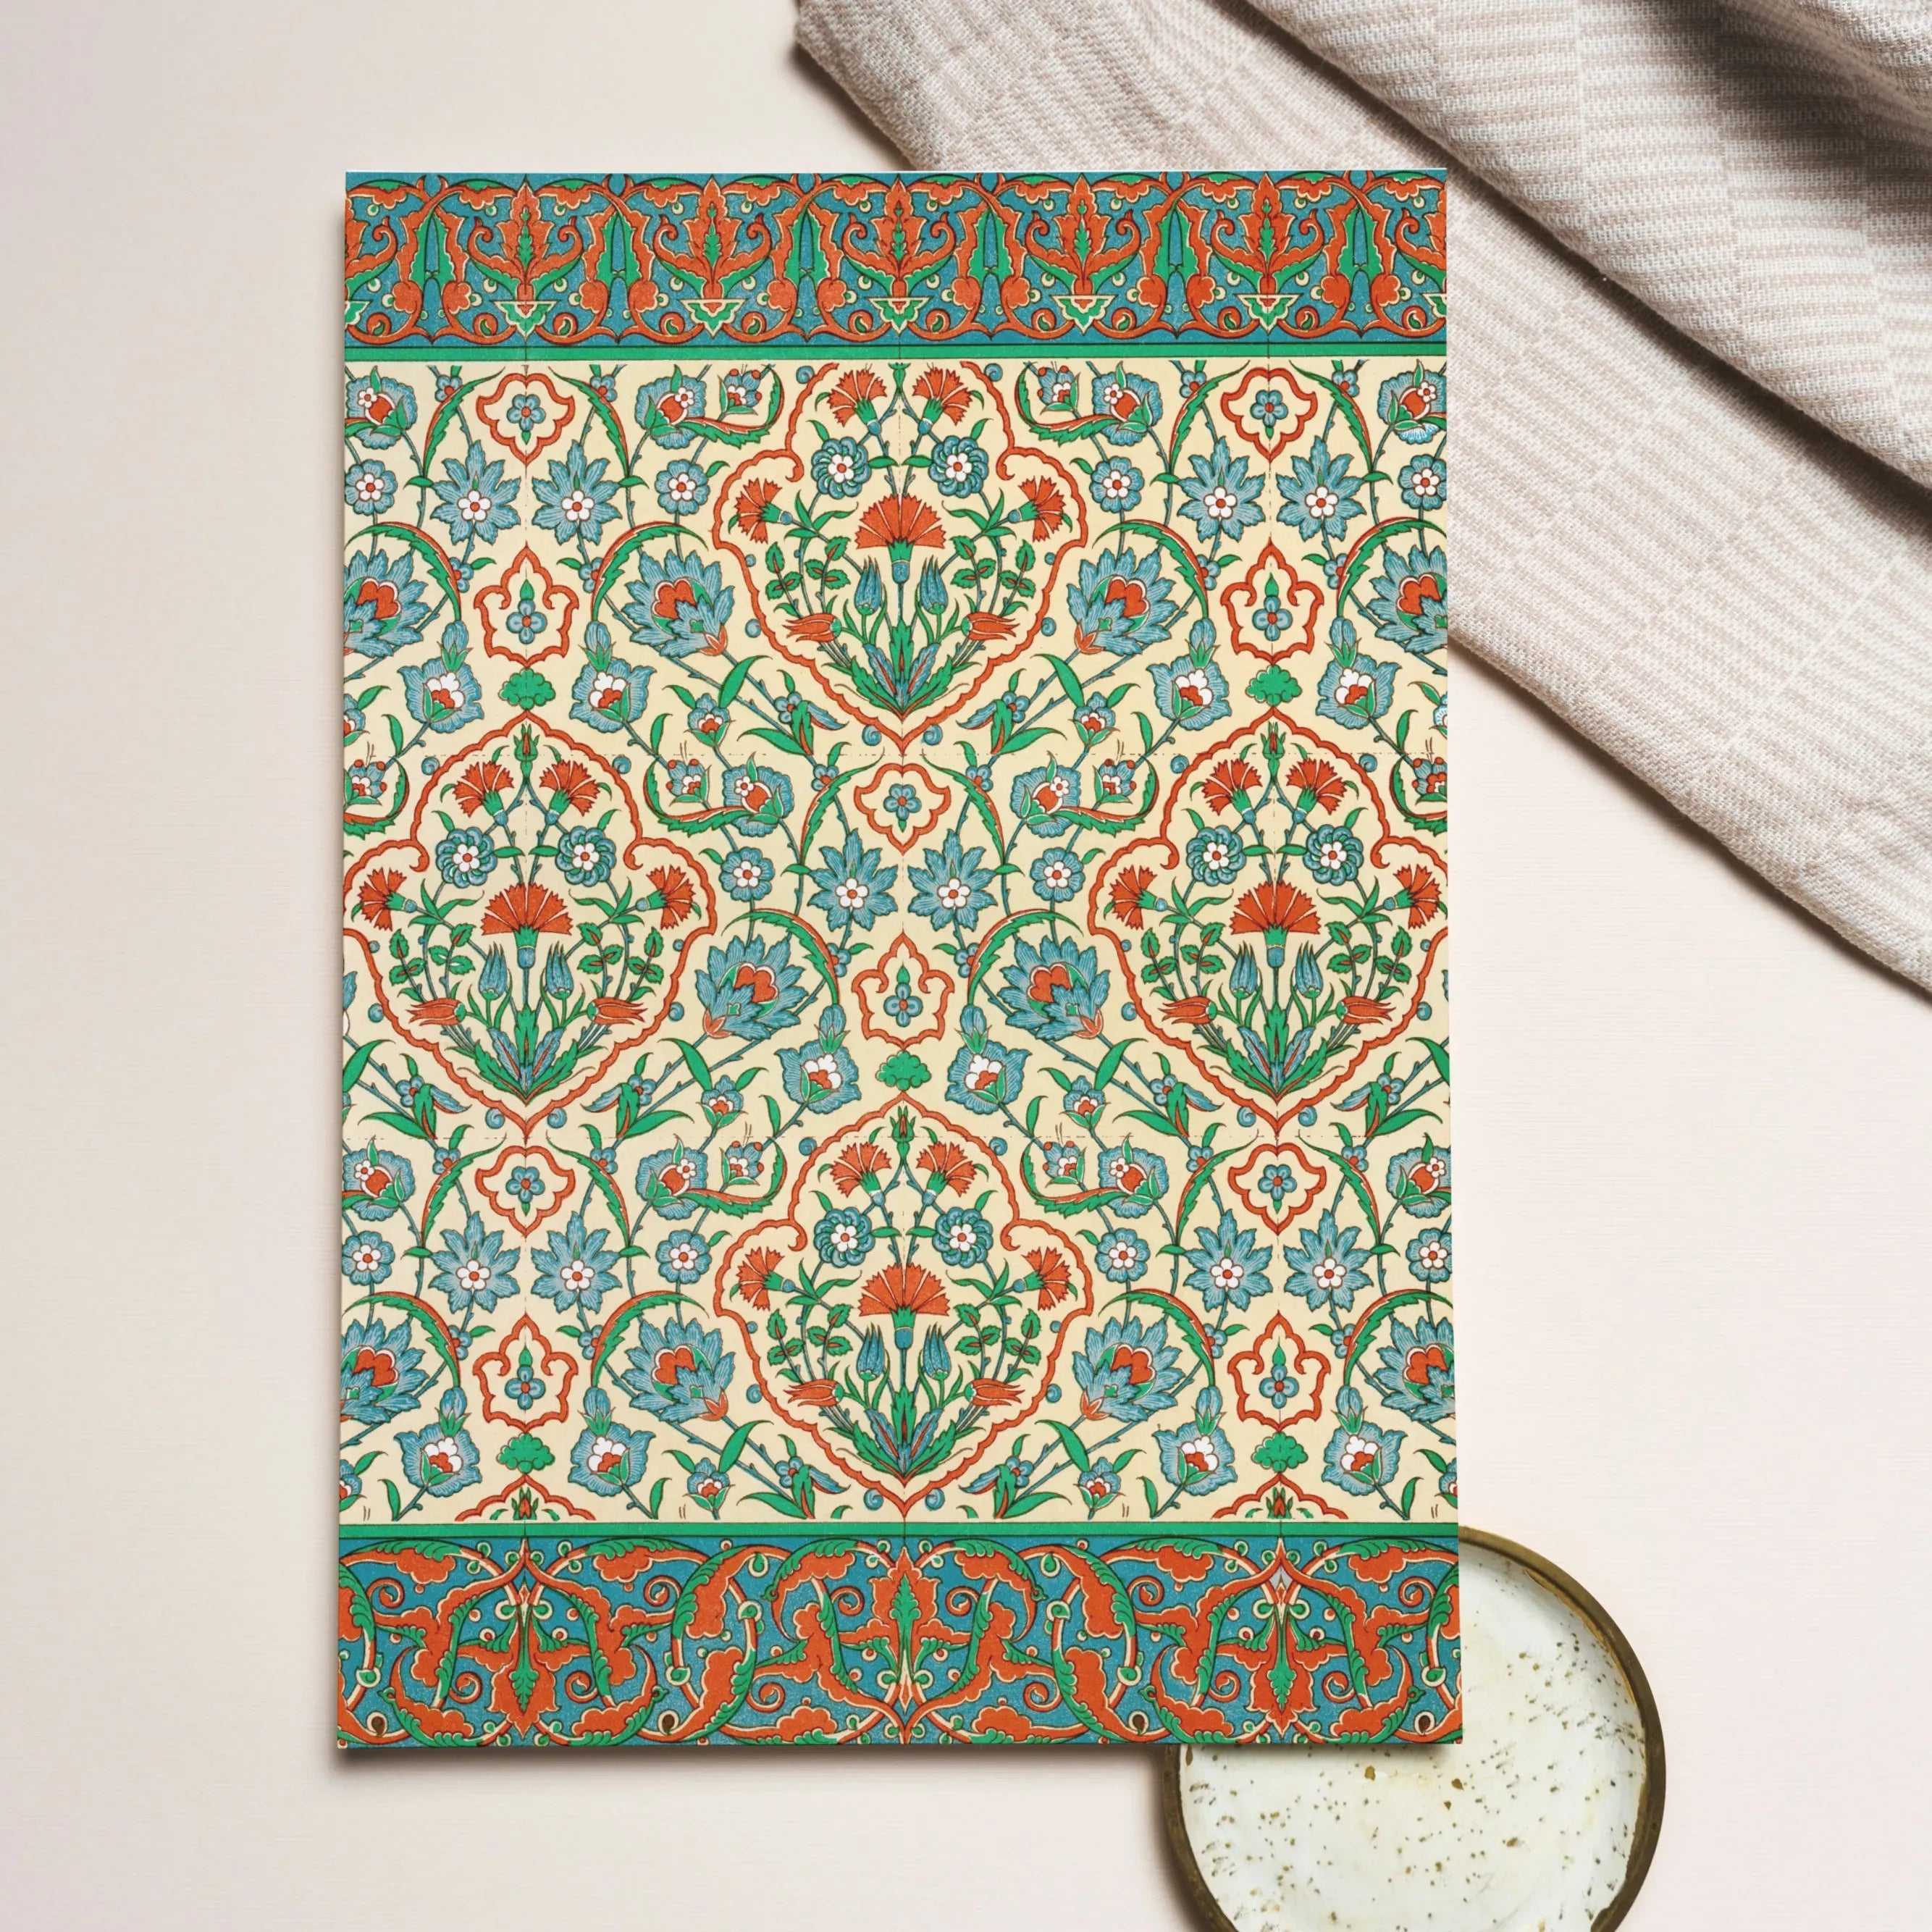 Emile Prisses D’avennes Pattern La Decoration Arabe Plate 33 Greeting Card - Greeting & Note Cards - Aesthetic Art